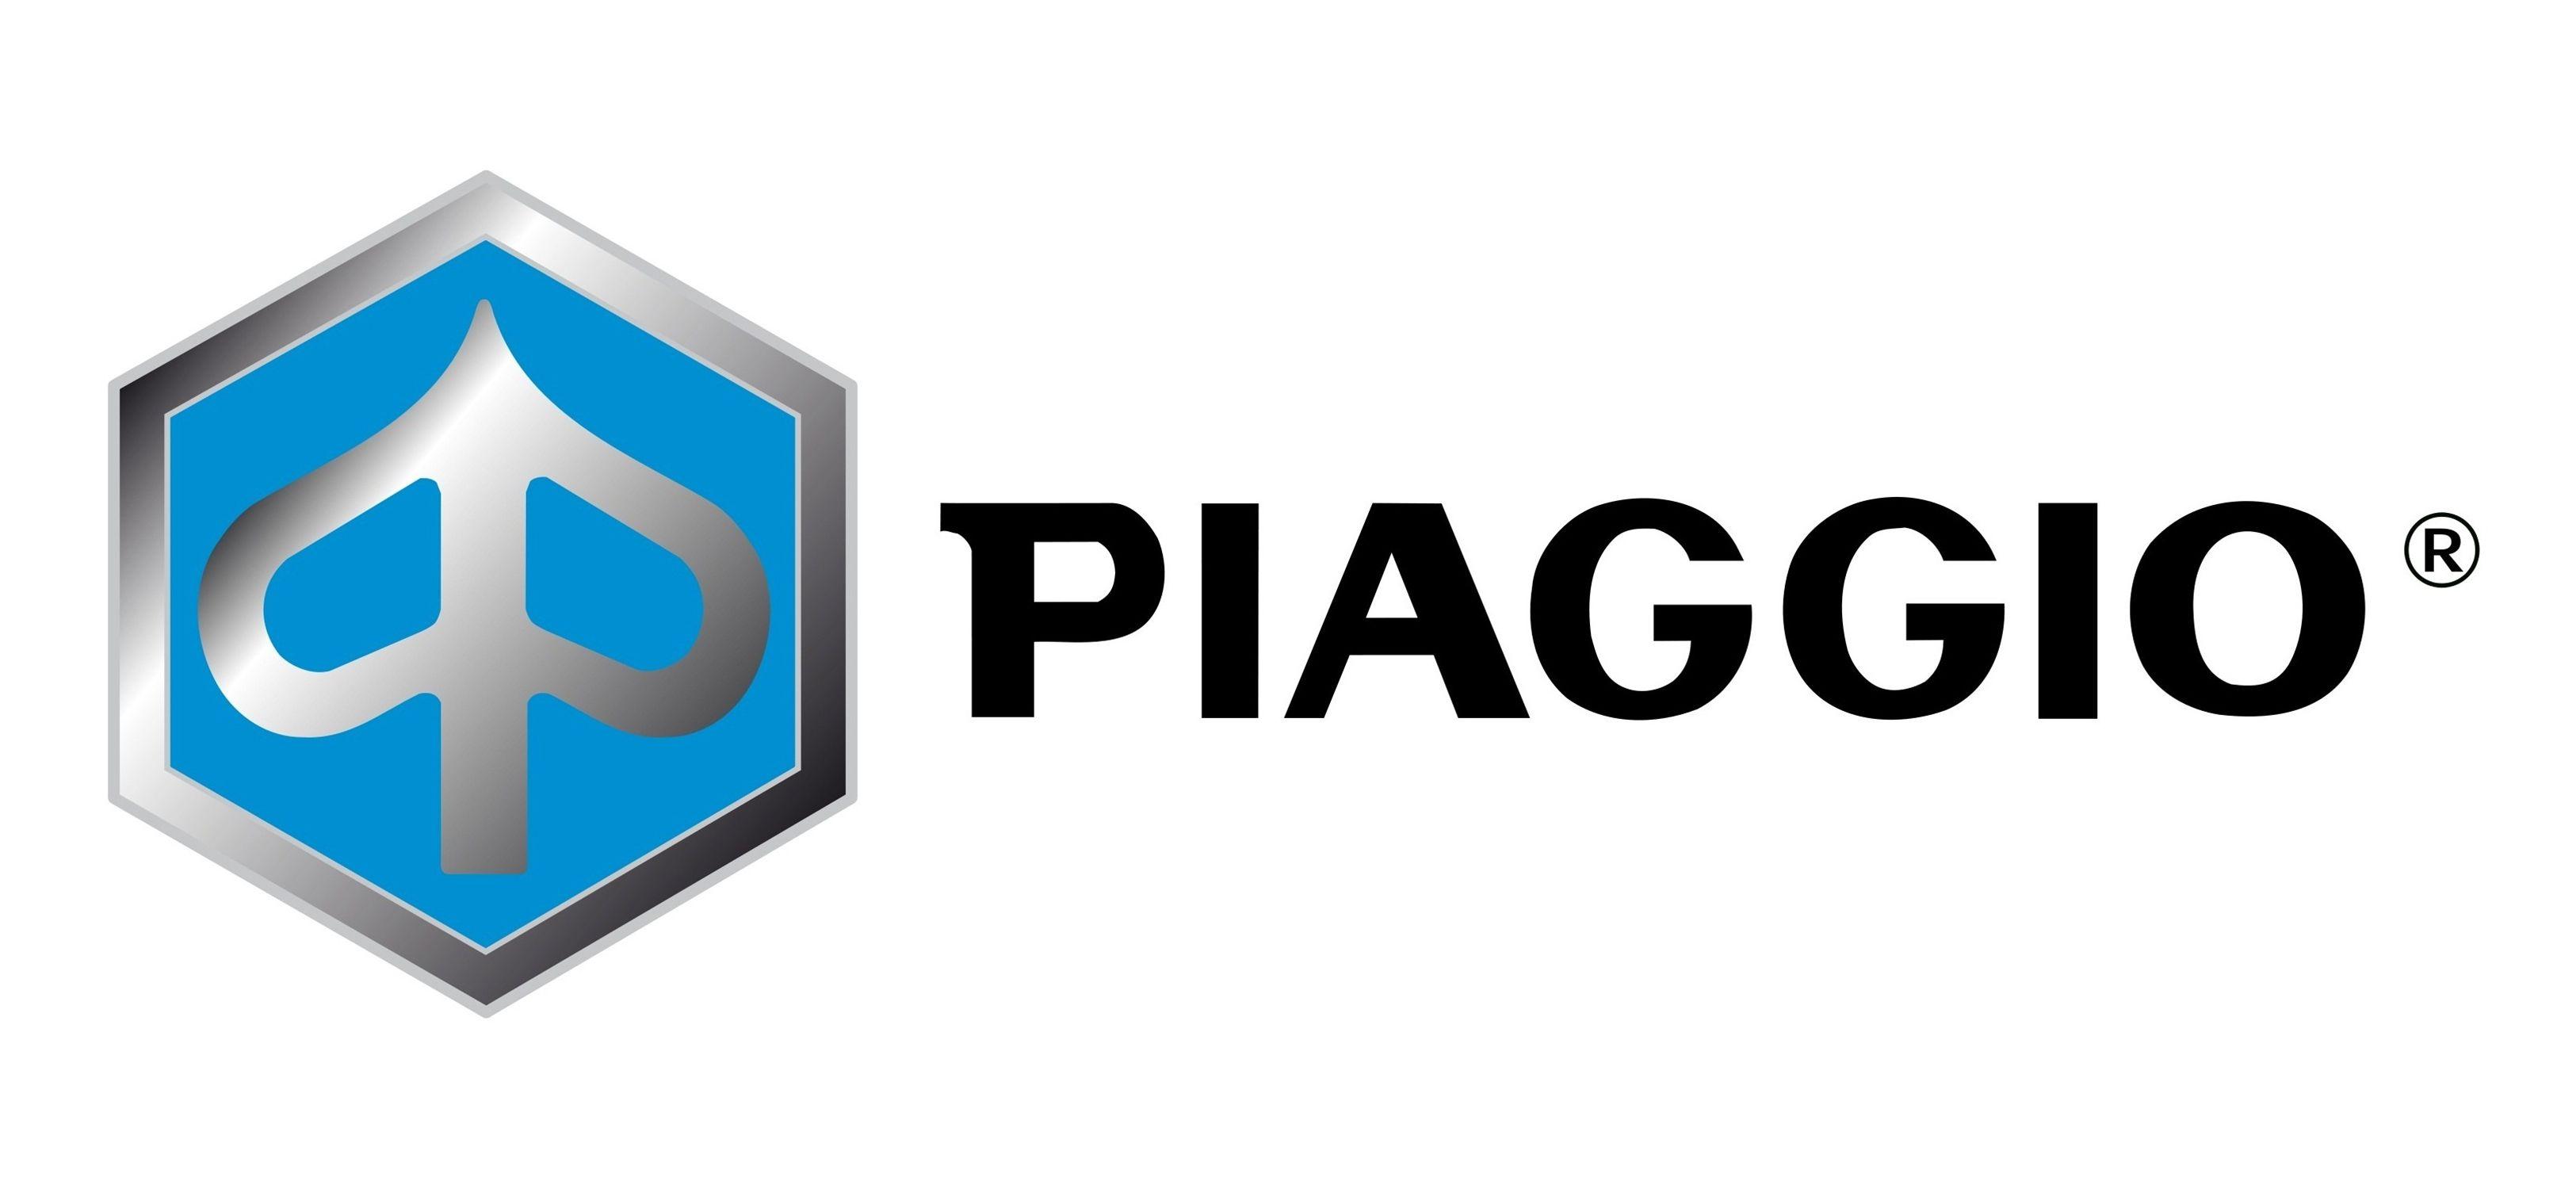 Piaggo Logo - Piaggio Logo Meaning and History, latest models | World Cars Brands